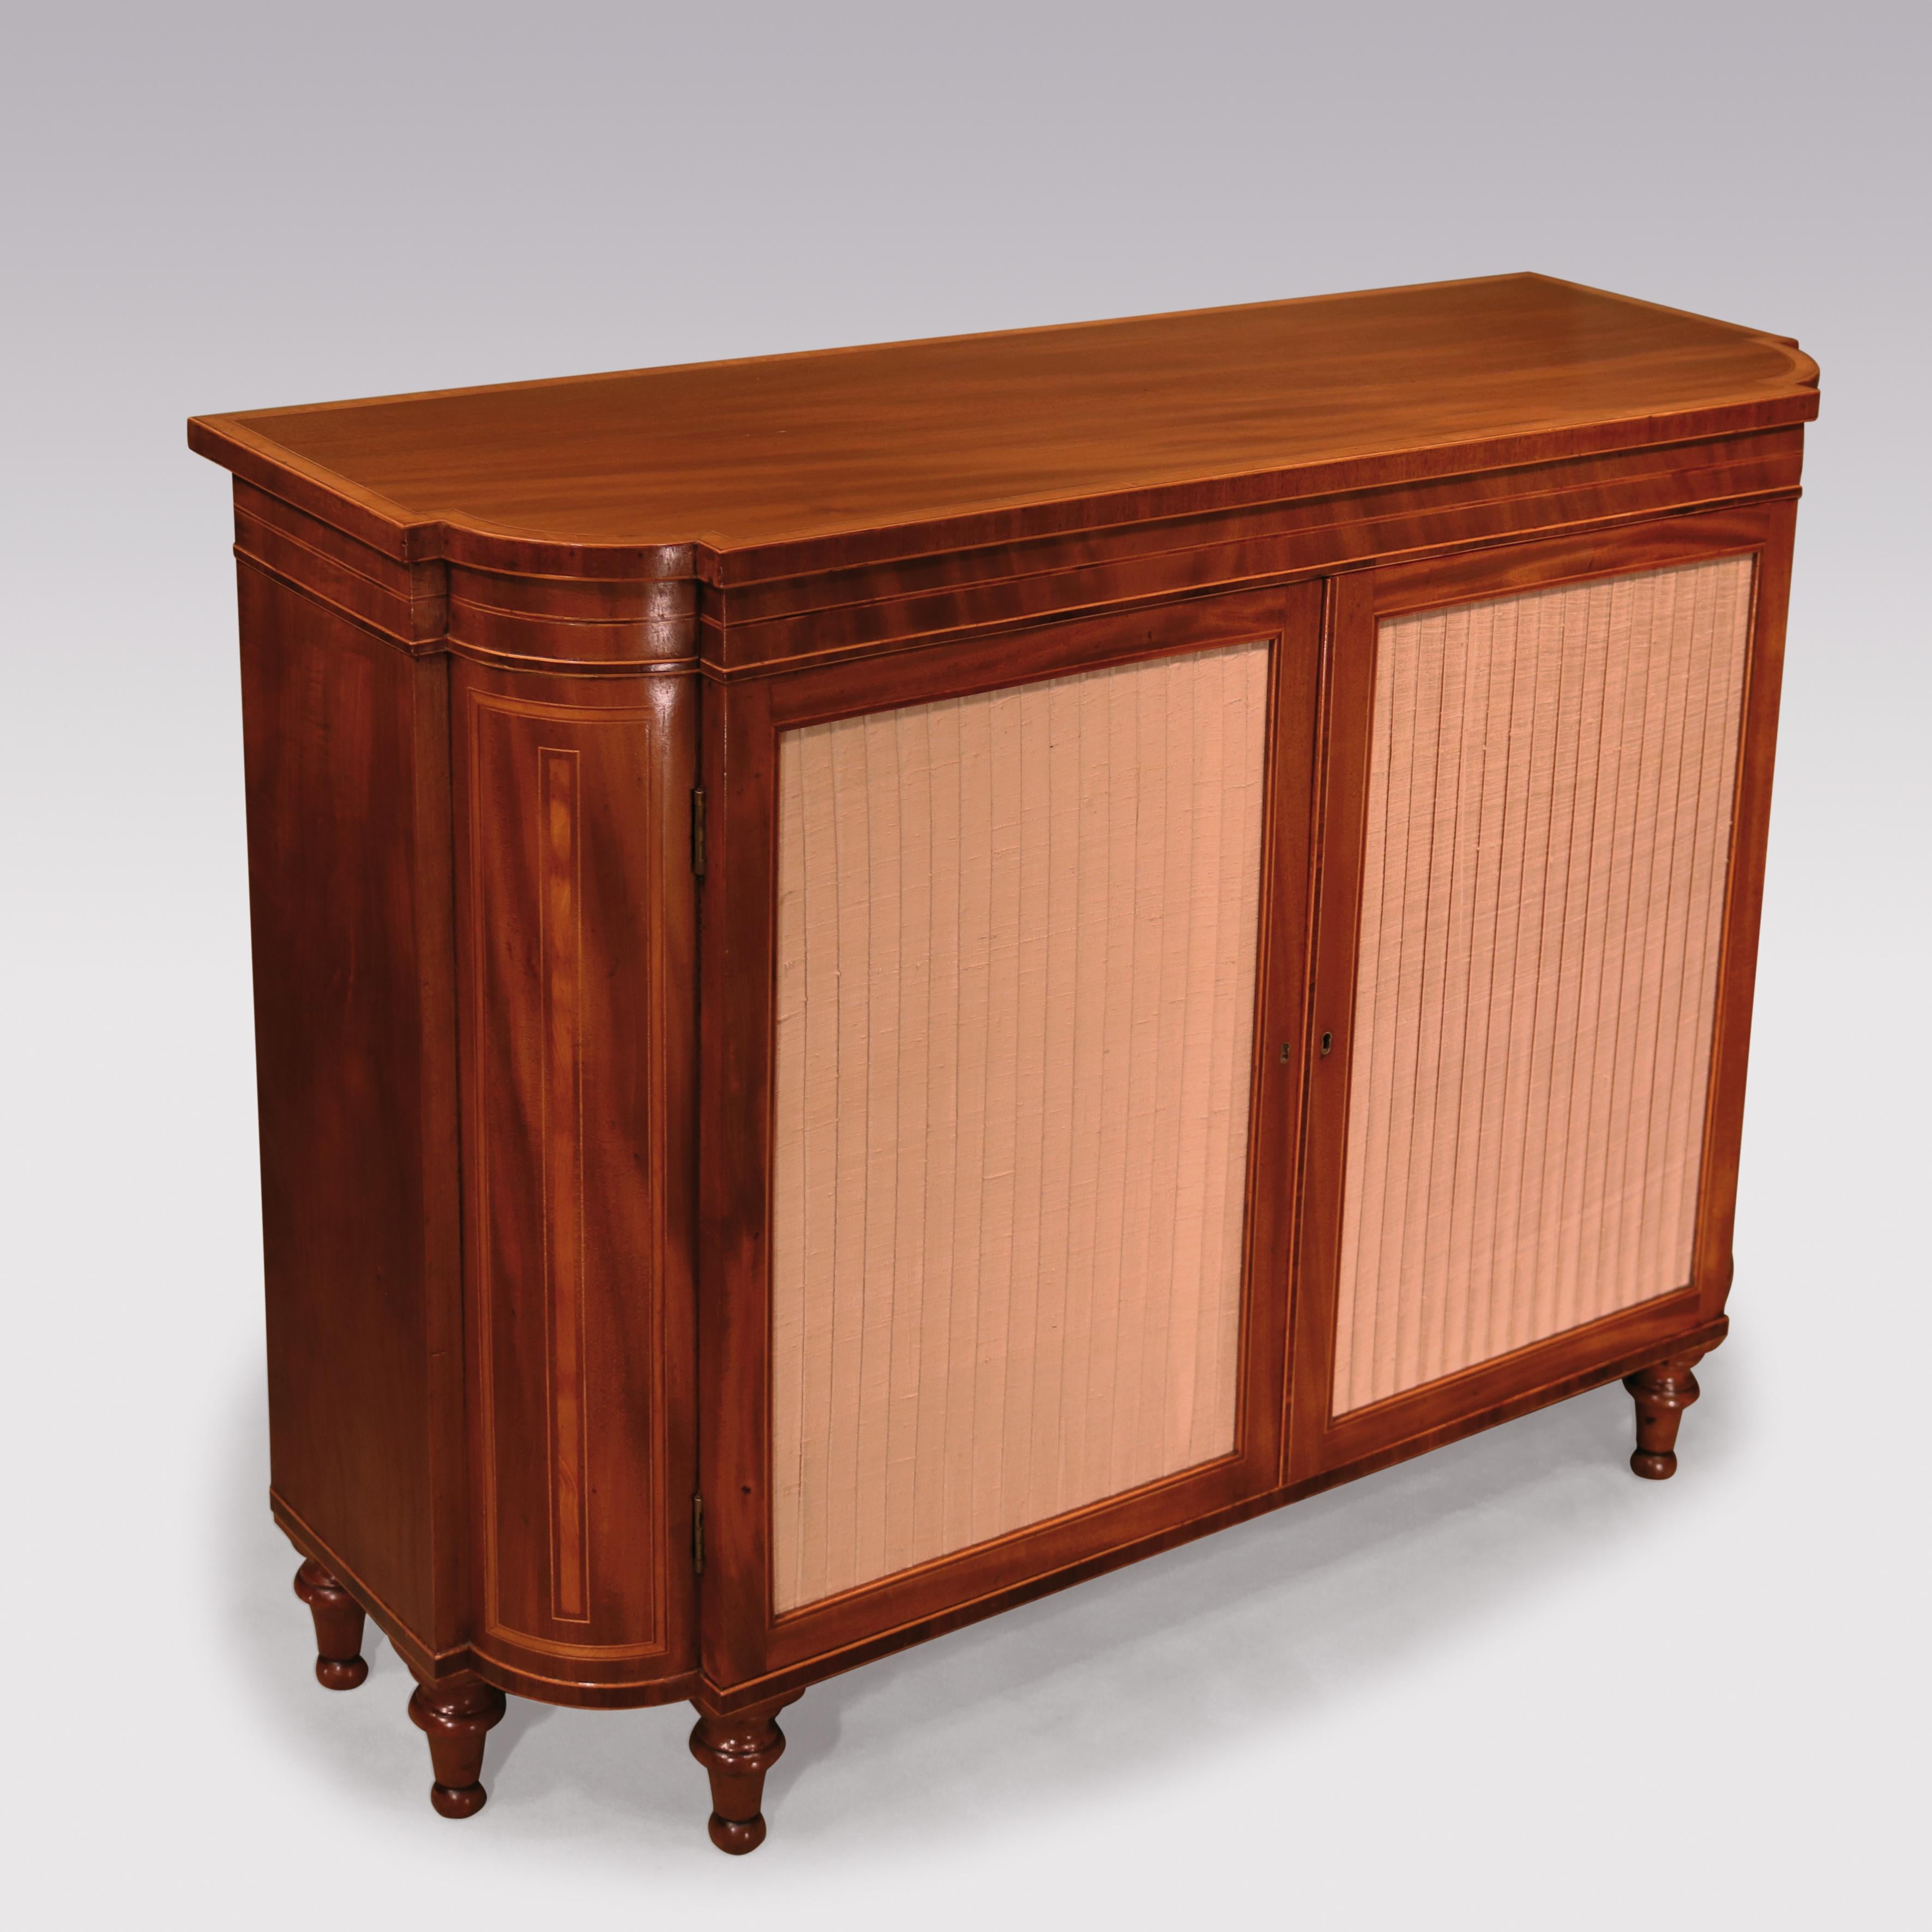 A George III period well figured and faded mahogany two-door cabinet, with box-wood and ebony lined stringing throughout, having a satinwood cross-banded breakfront top, above two pleated silk-lined doors flanked by inlaid ‘rounded ’sides, supported